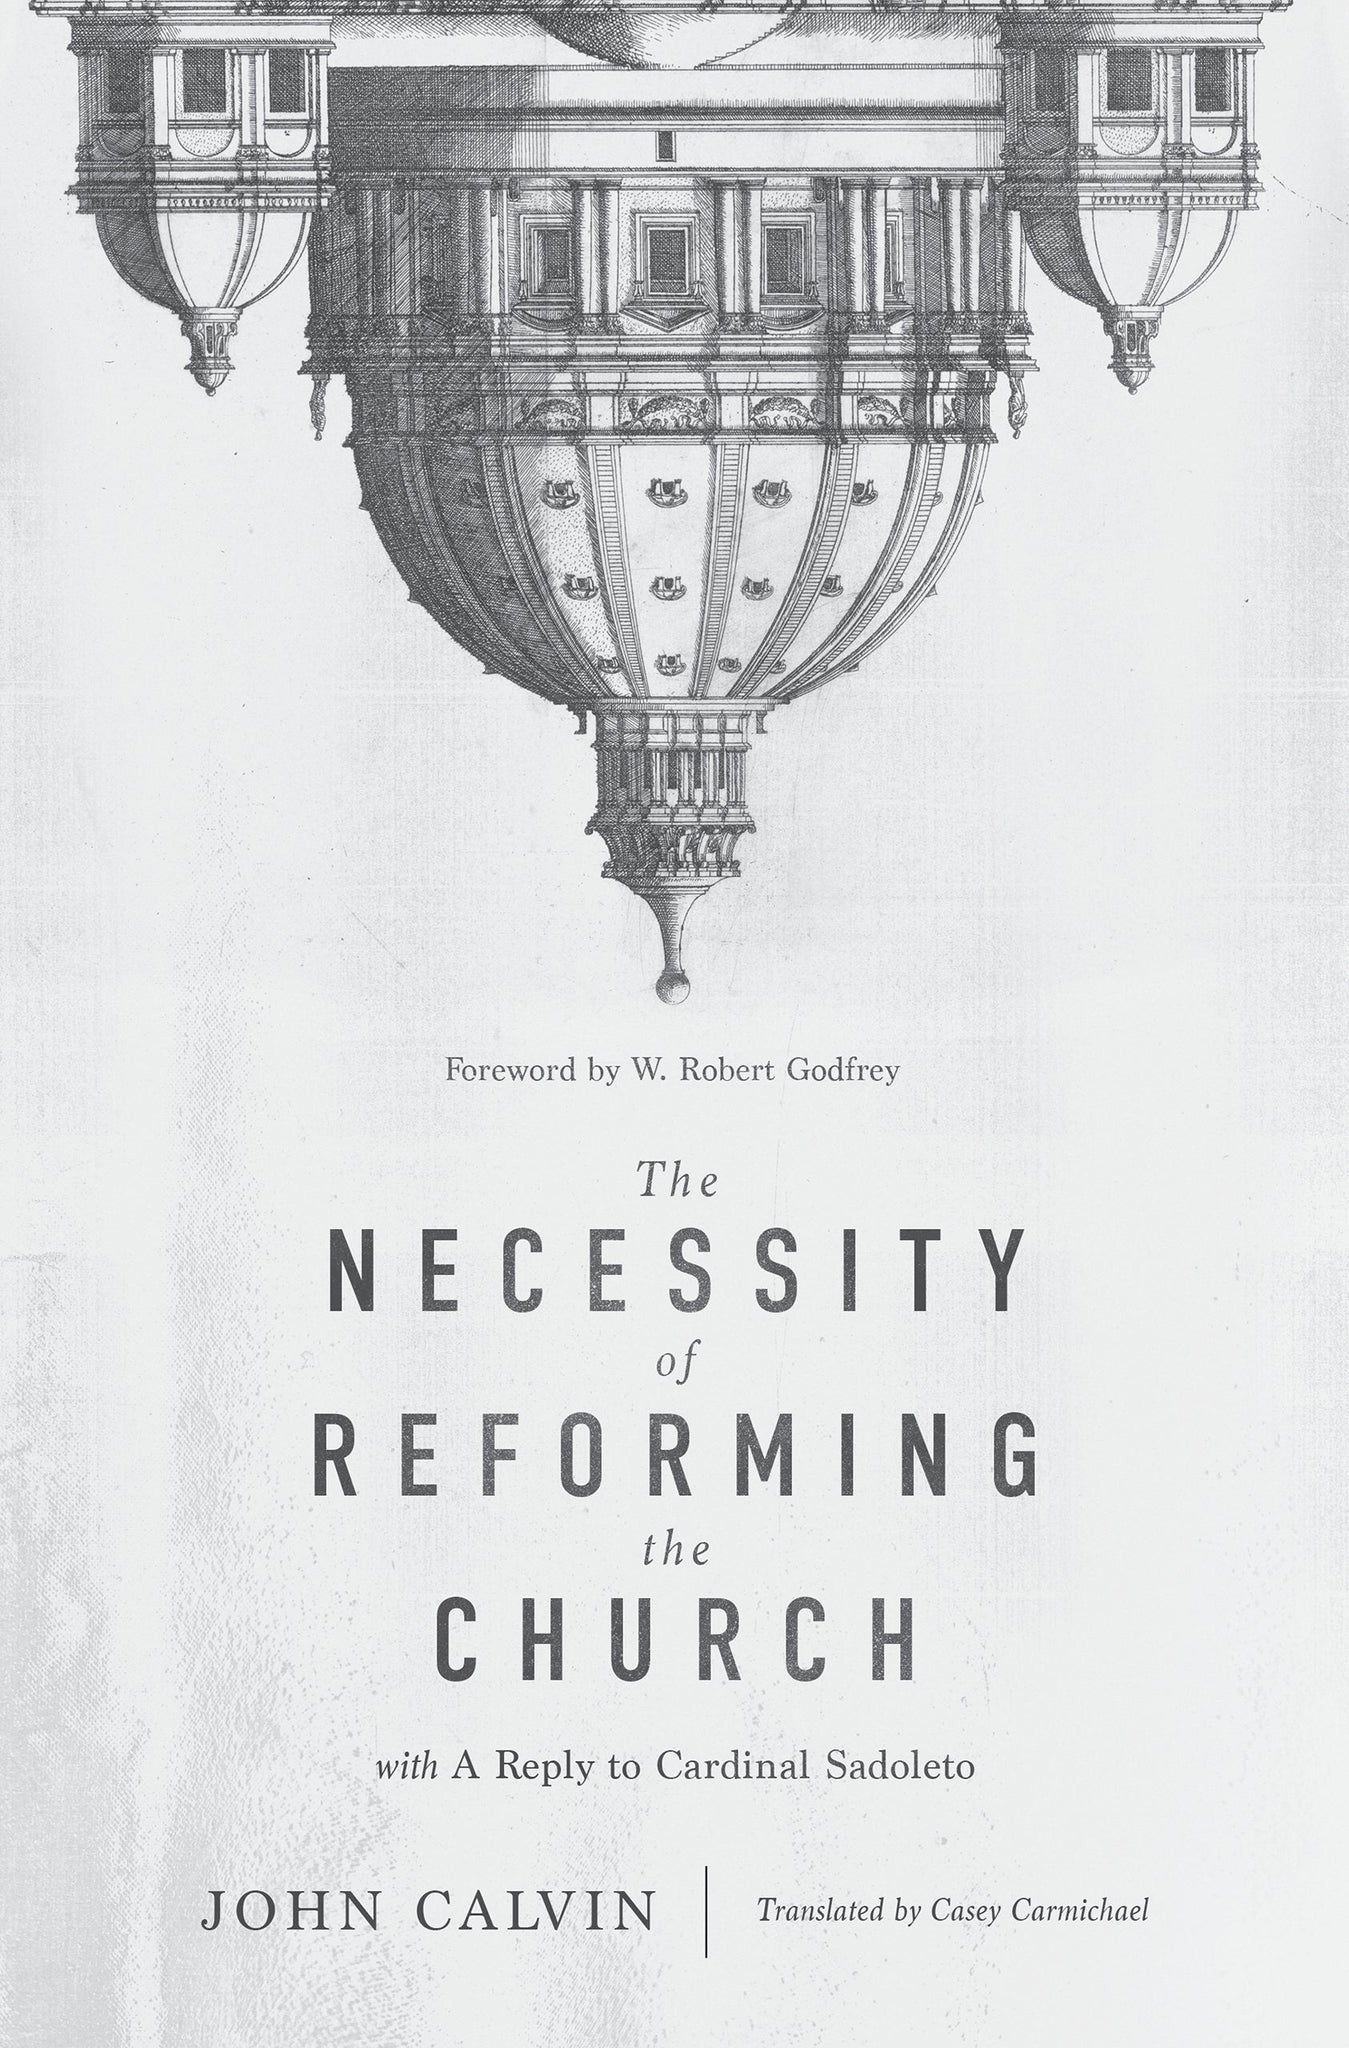 The Necessity of Reforming the Church: with a Reply to Cardinal Sadoleto